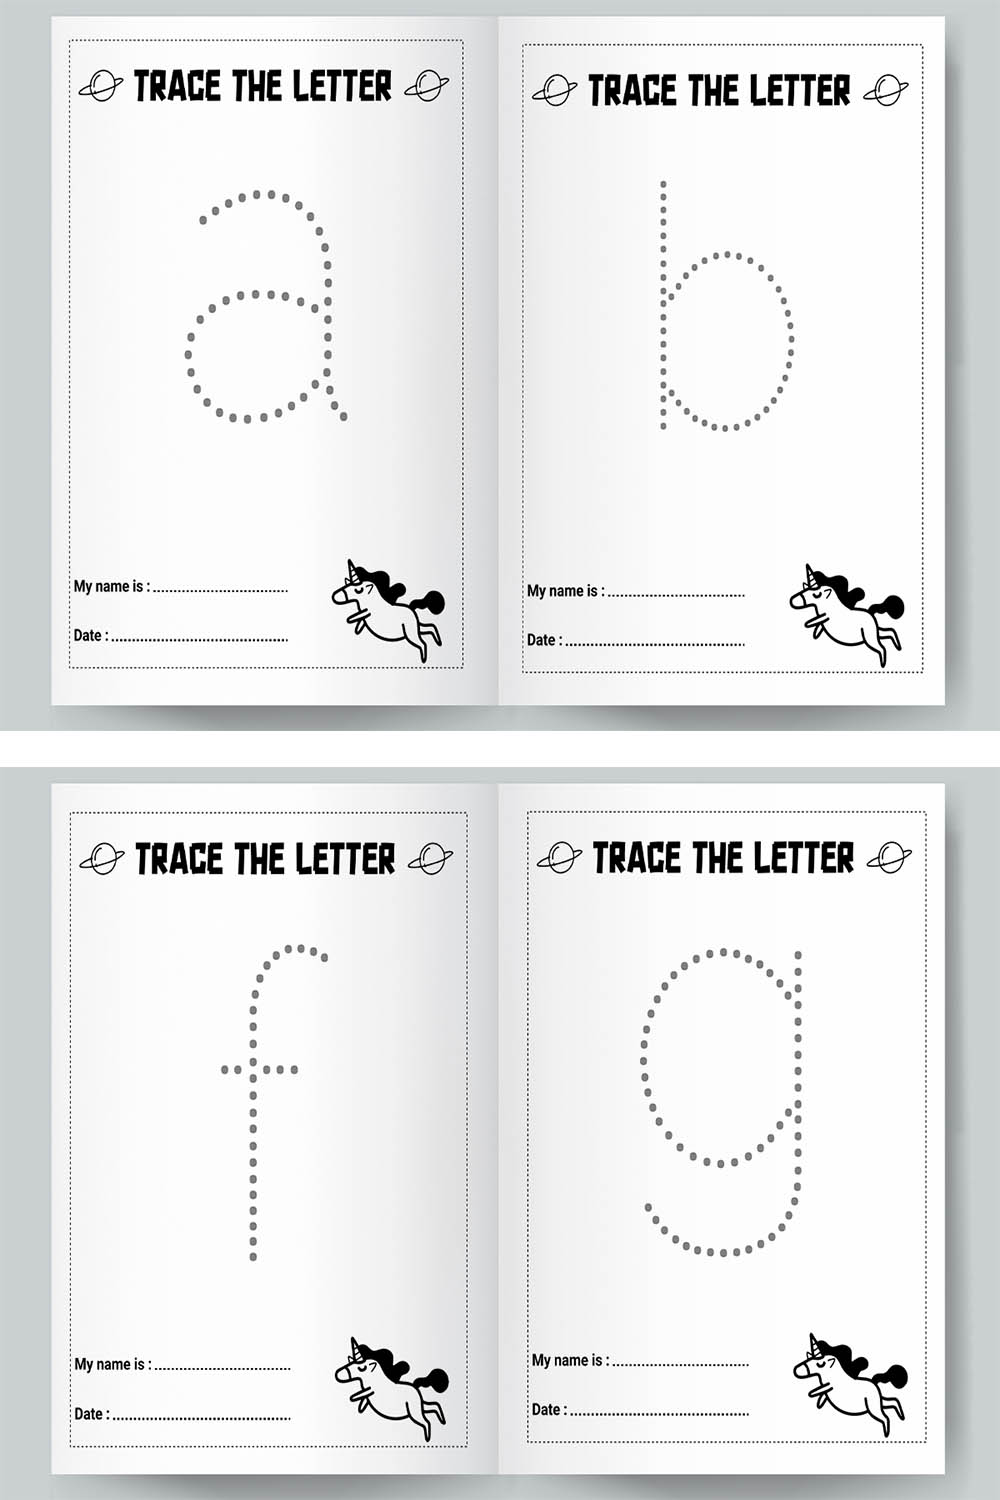 Letters Tracing Single Letter Lower KDP Interior pinterest image.